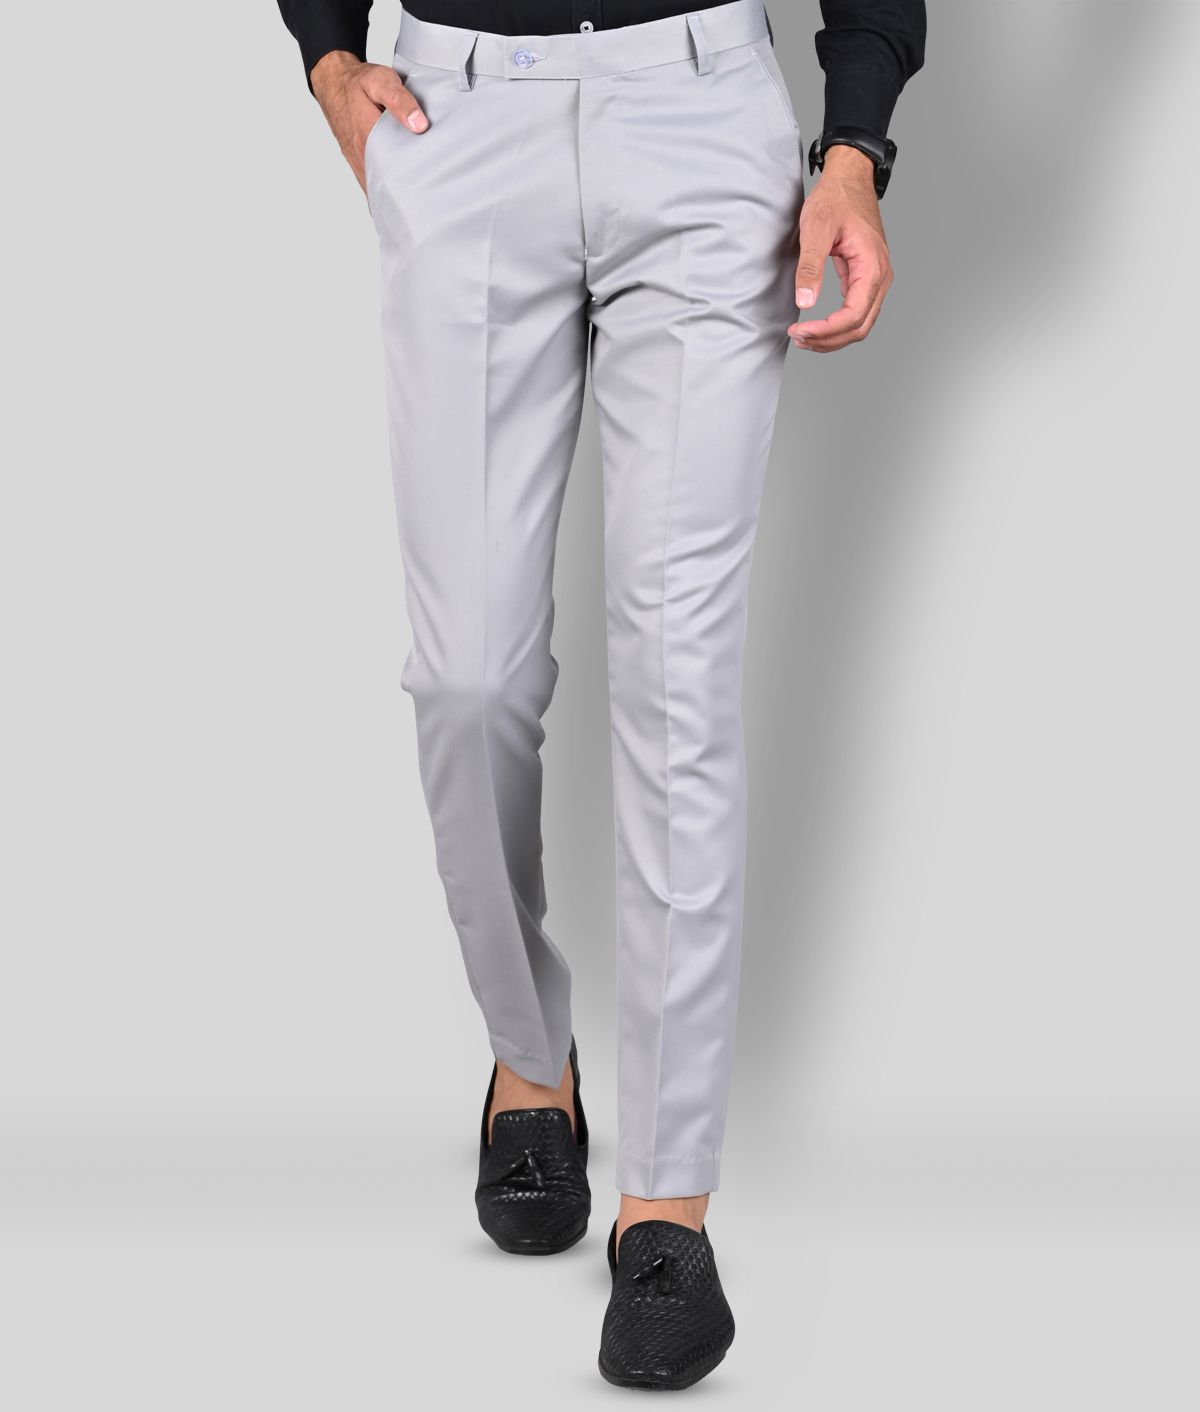 Mens Skinny Fit Tonic Formal Trousers Brand find 